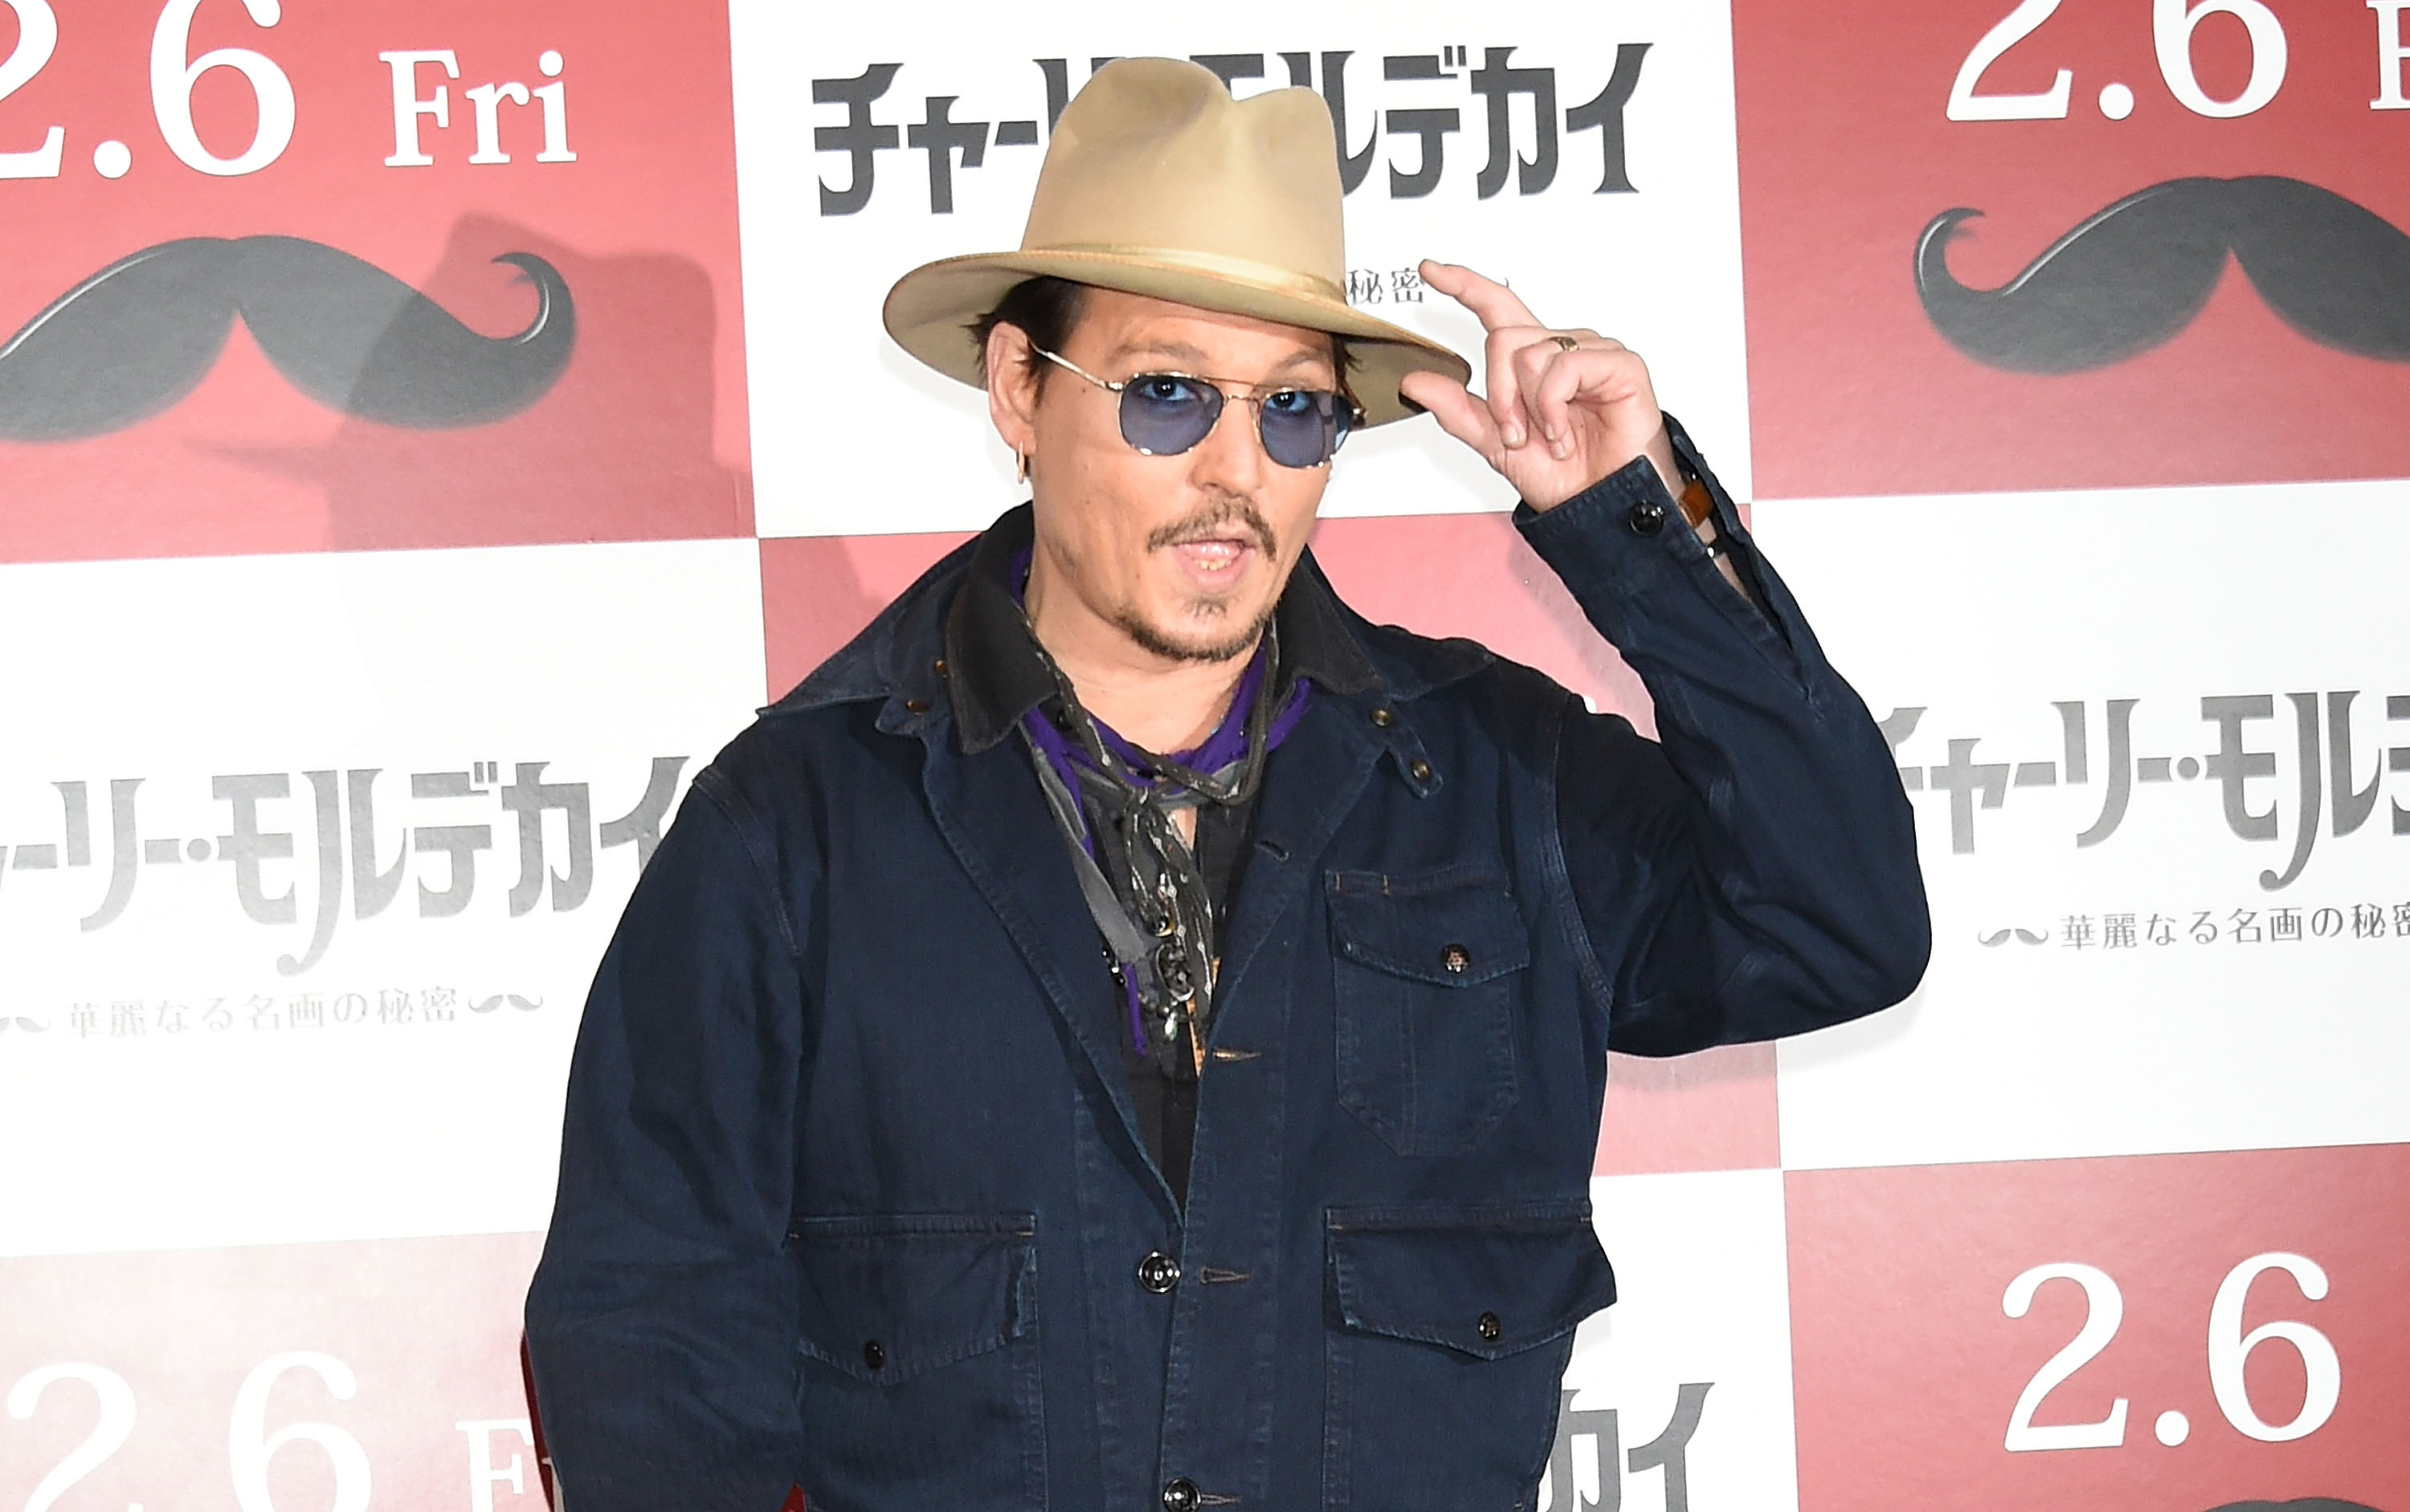 Johnny Depp attends the photo call for "Mortdecai" at The Peninsula Tokyo on January 28, 2015 in Tokyo, Japan. (Jun Sato&mdash;WireImage)